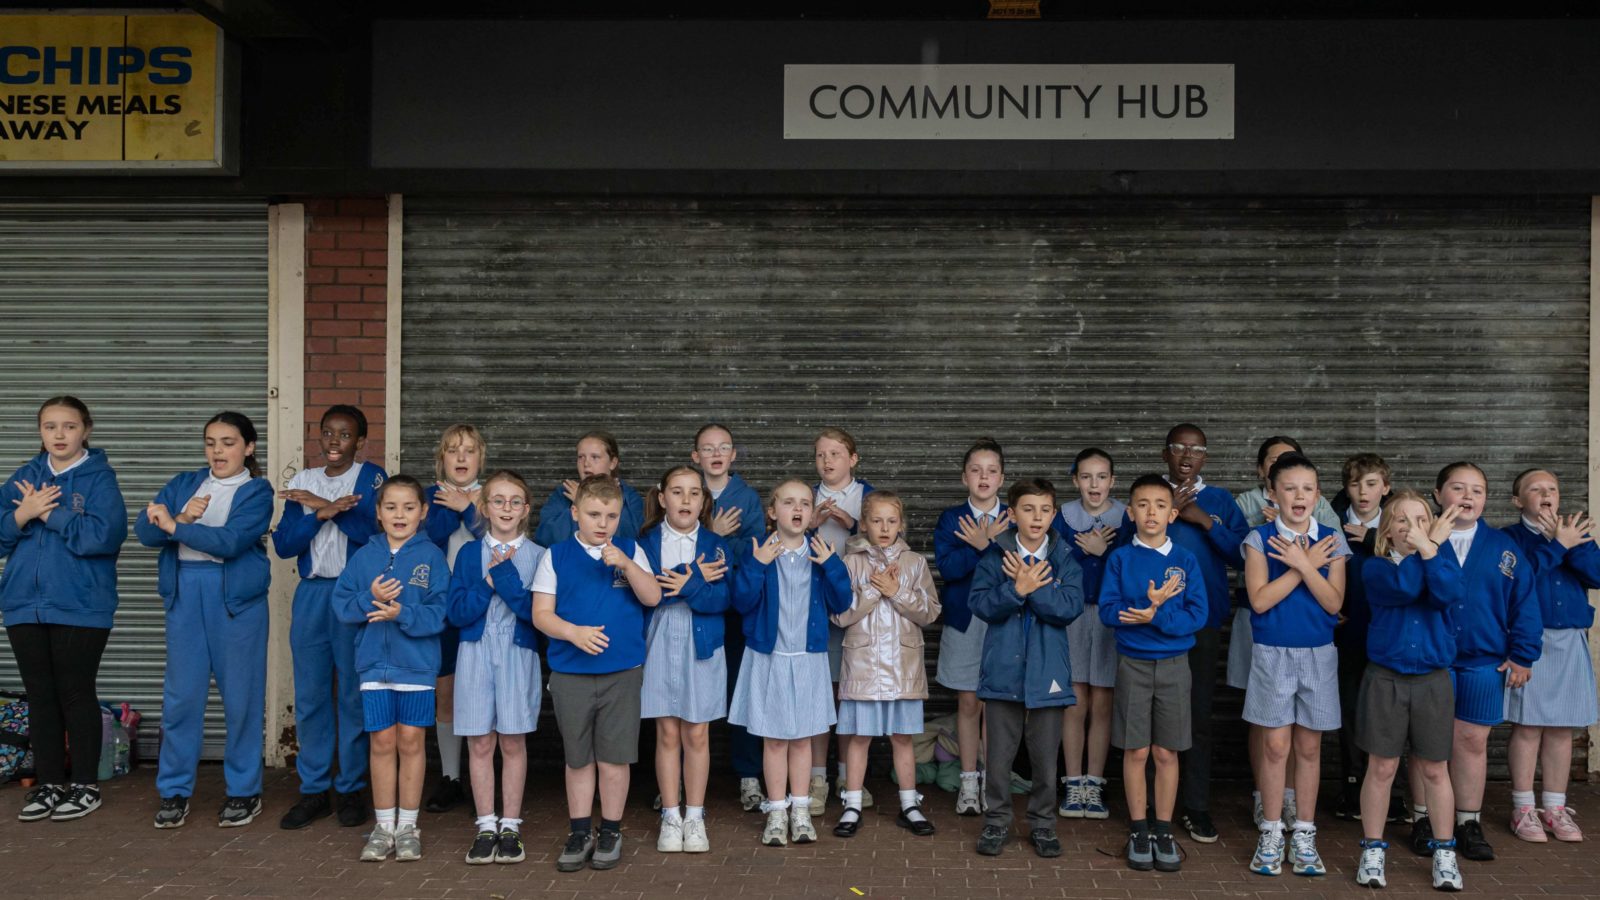 Schoolchildren are in front of a sign that reads ‘Community Hub’ singing and dancing.